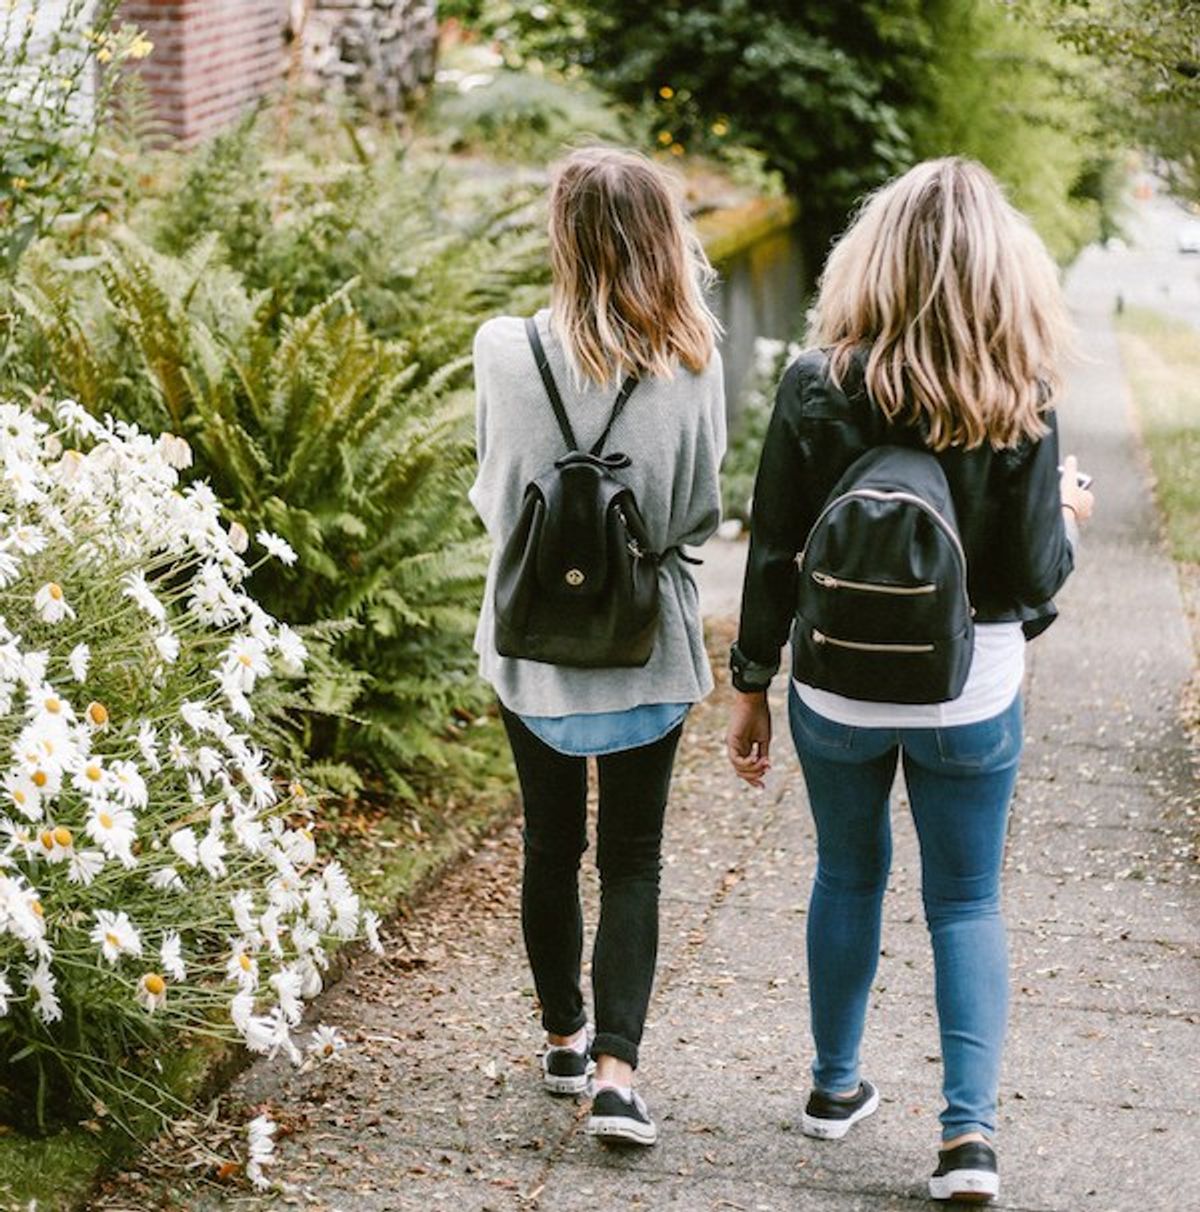 18 Reasons You Know Your Best Friend Has Become Family